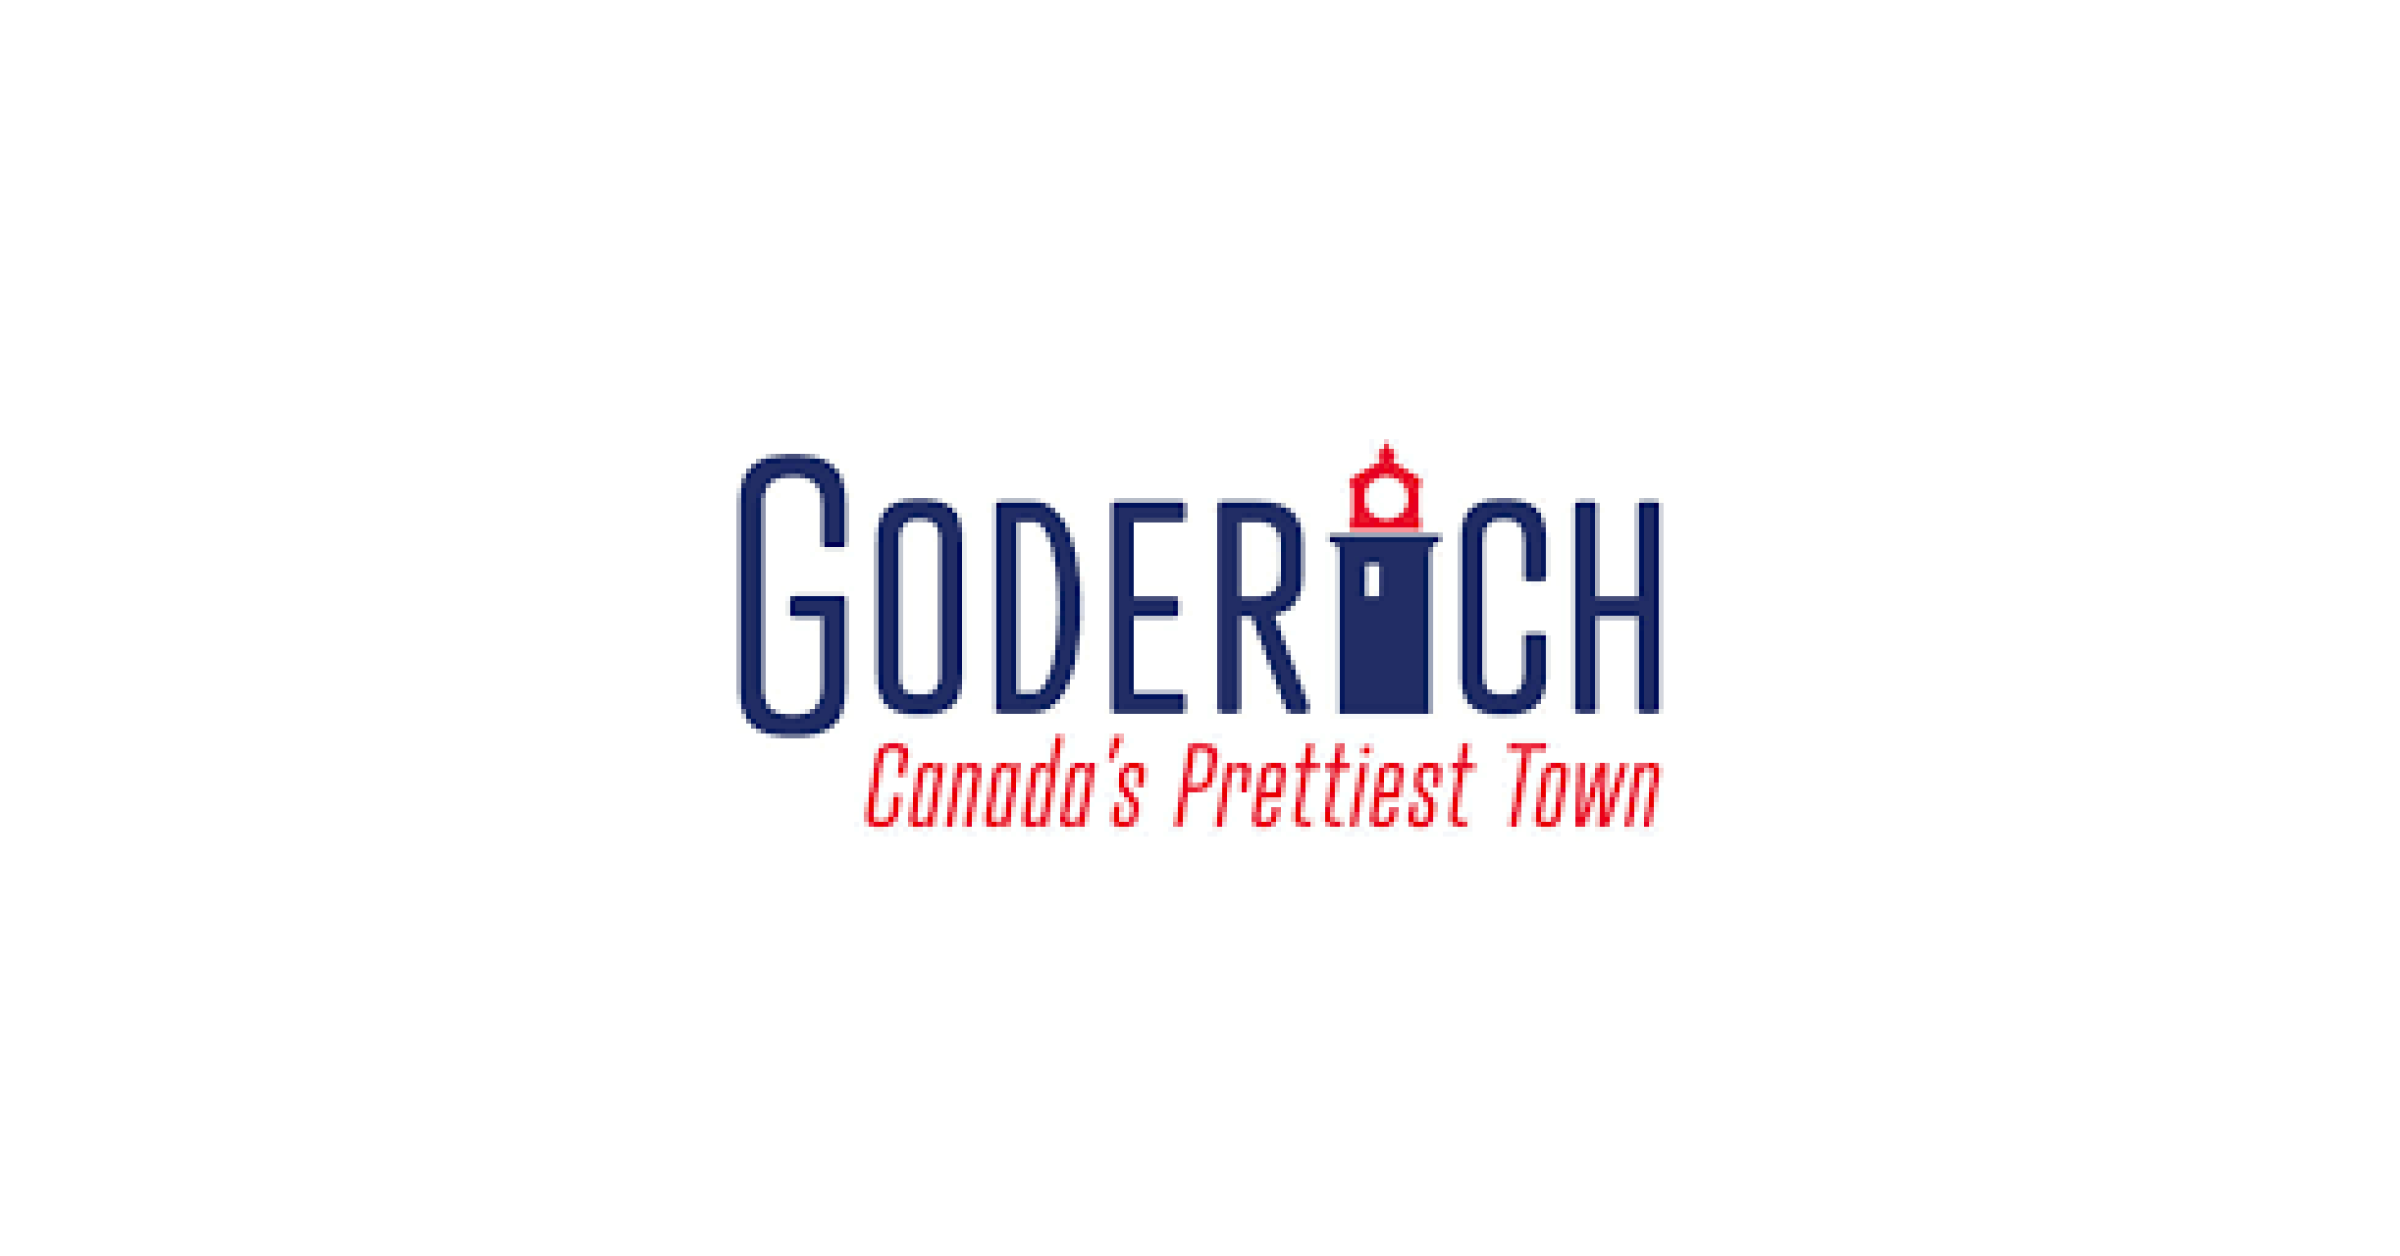 Town of Goderich